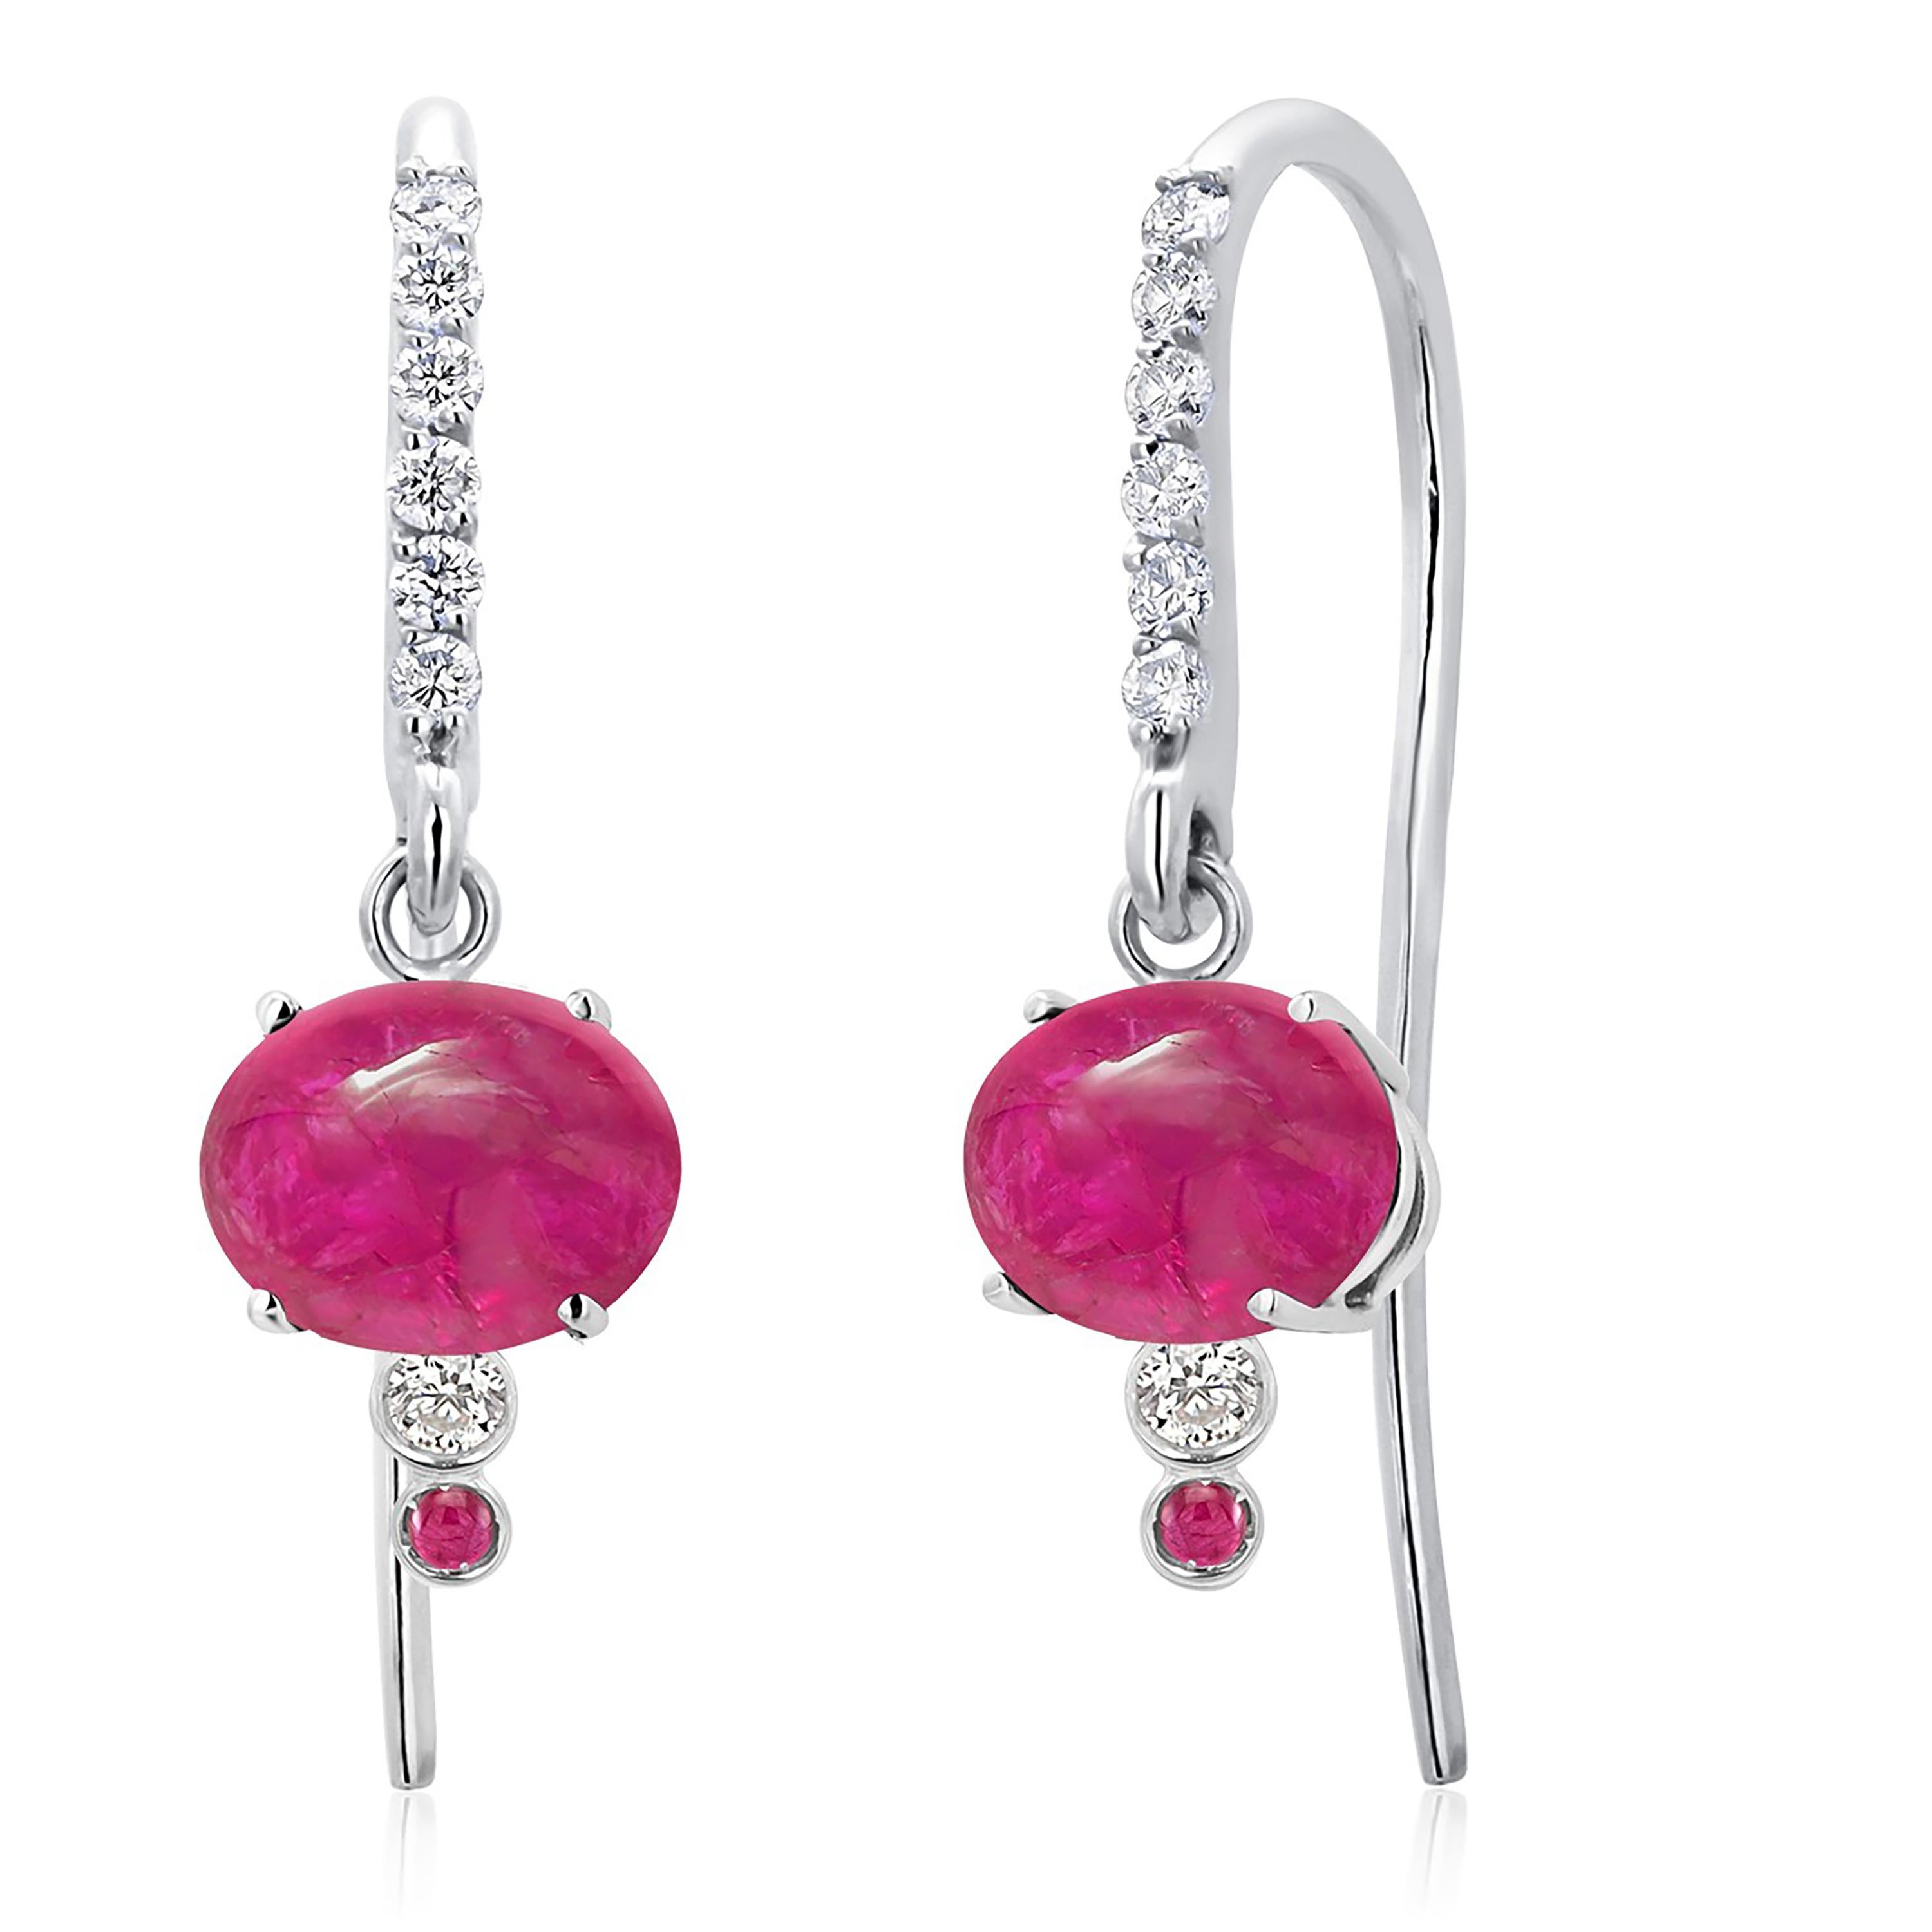 Match Cabochon Burma Ruby Diamond 3 Carat 1 Inch Shepherd White Gold Earrings In New Condition For Sale In New York, NY